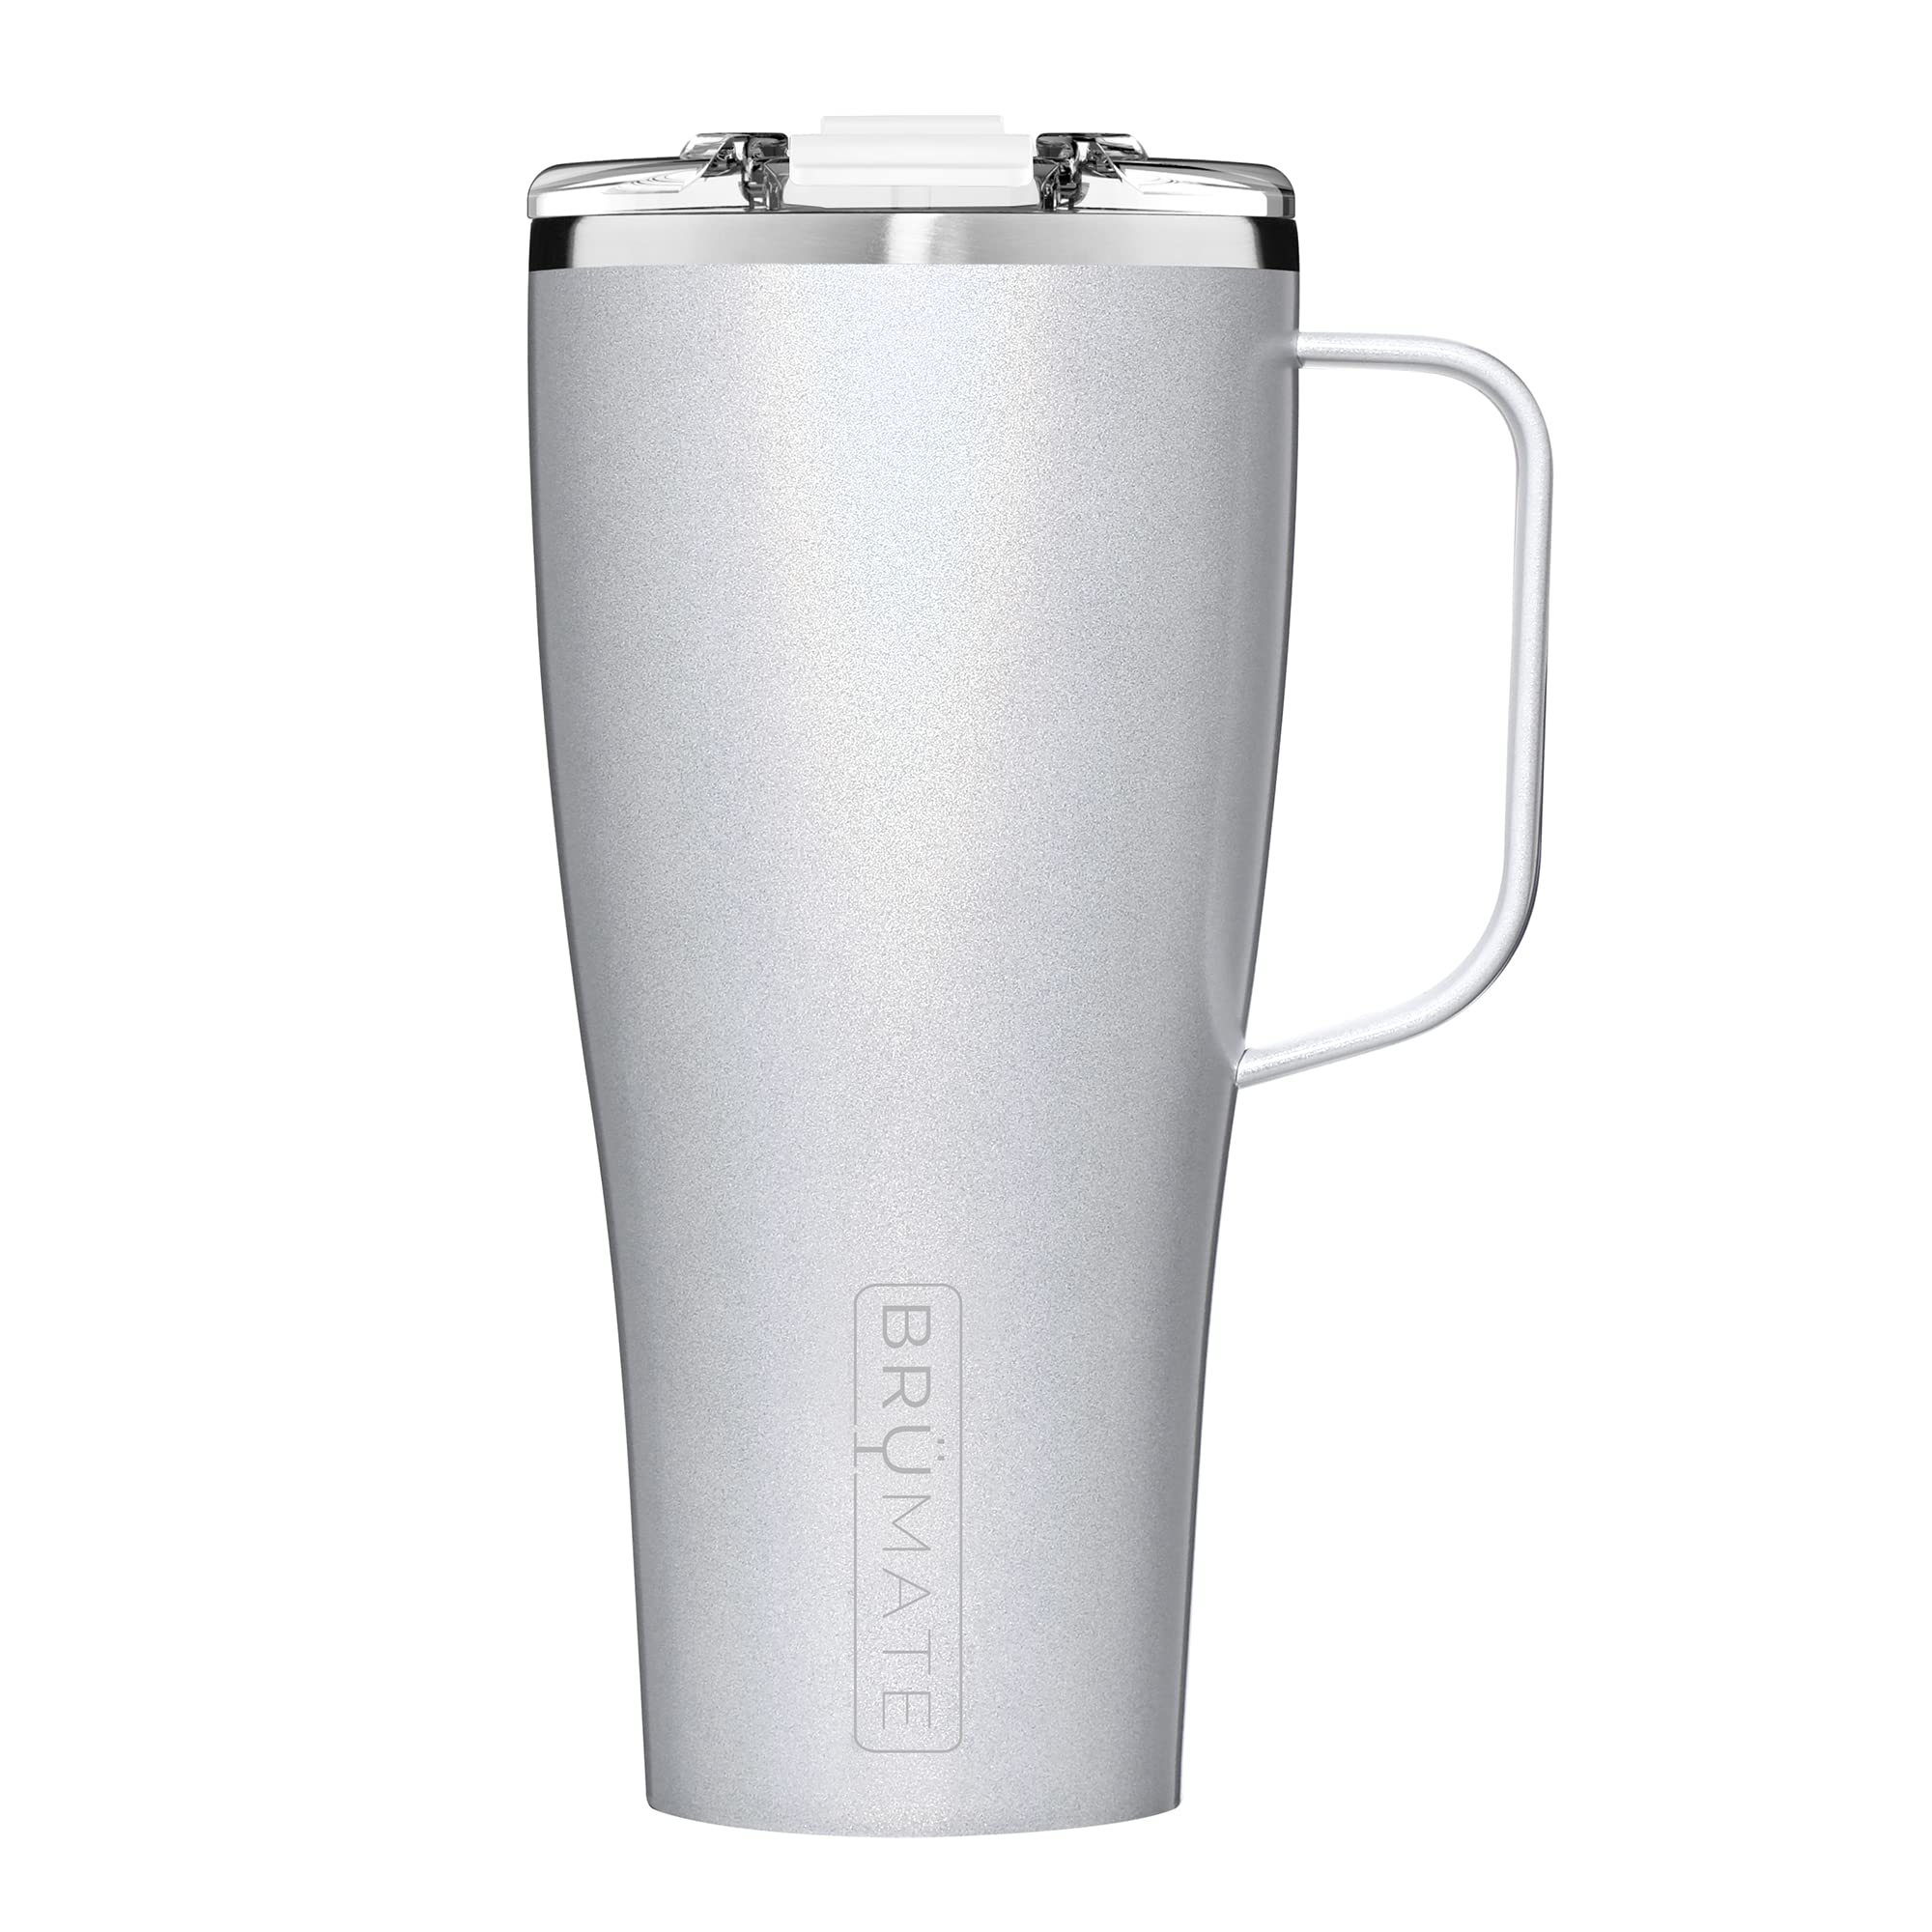 BrüMate Toddy XL - 32oz 100% Leak Proof Insulated Coffee Mug with Handle & Lid - Stainless Steel Coffee Travel Mug - Double Walled Coffee Cup (Glitter White)